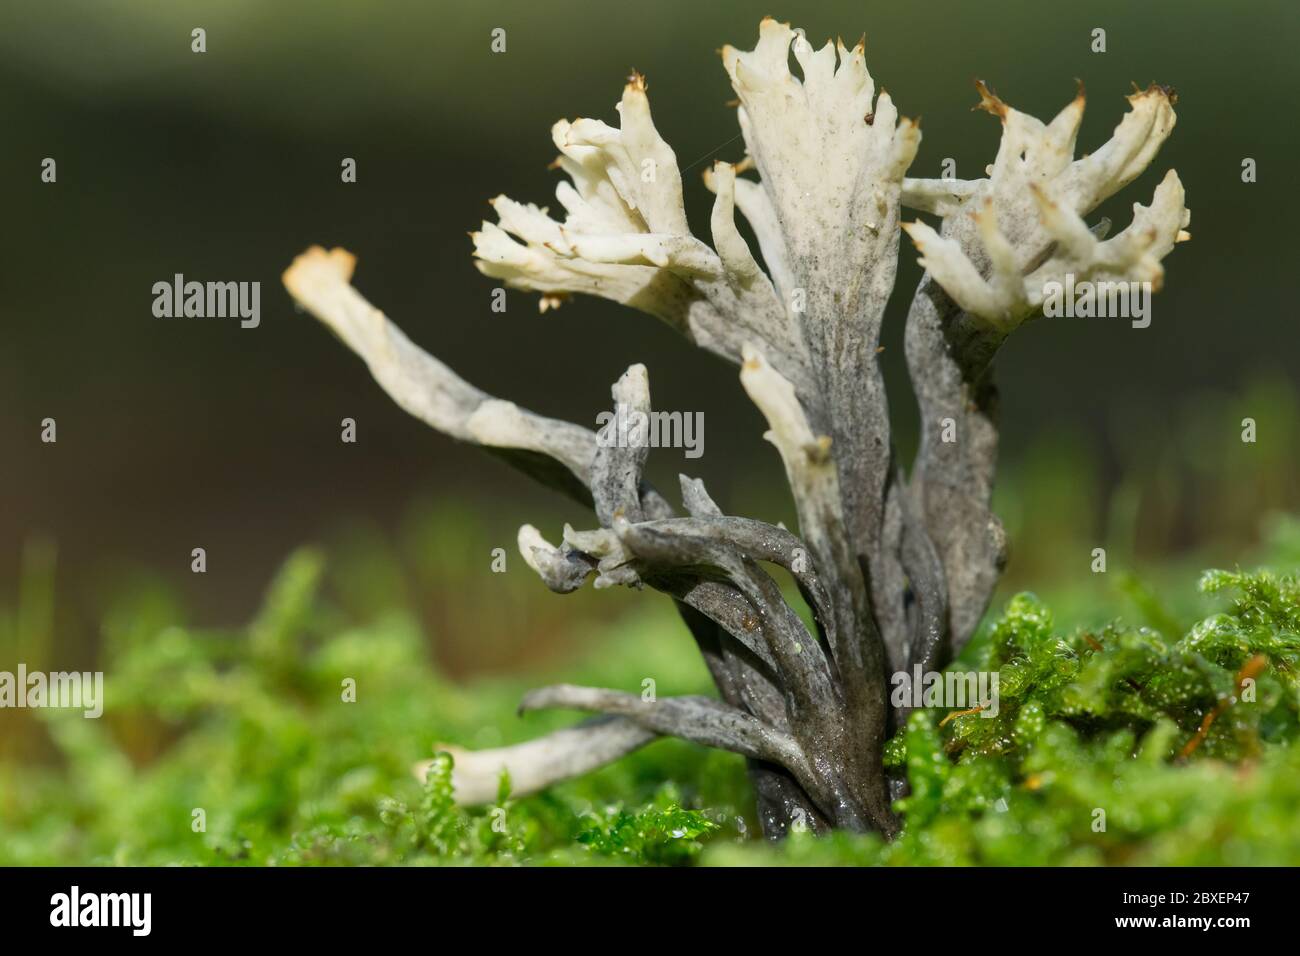 Crested coral infected by a ascomycete fungi Stock Photo